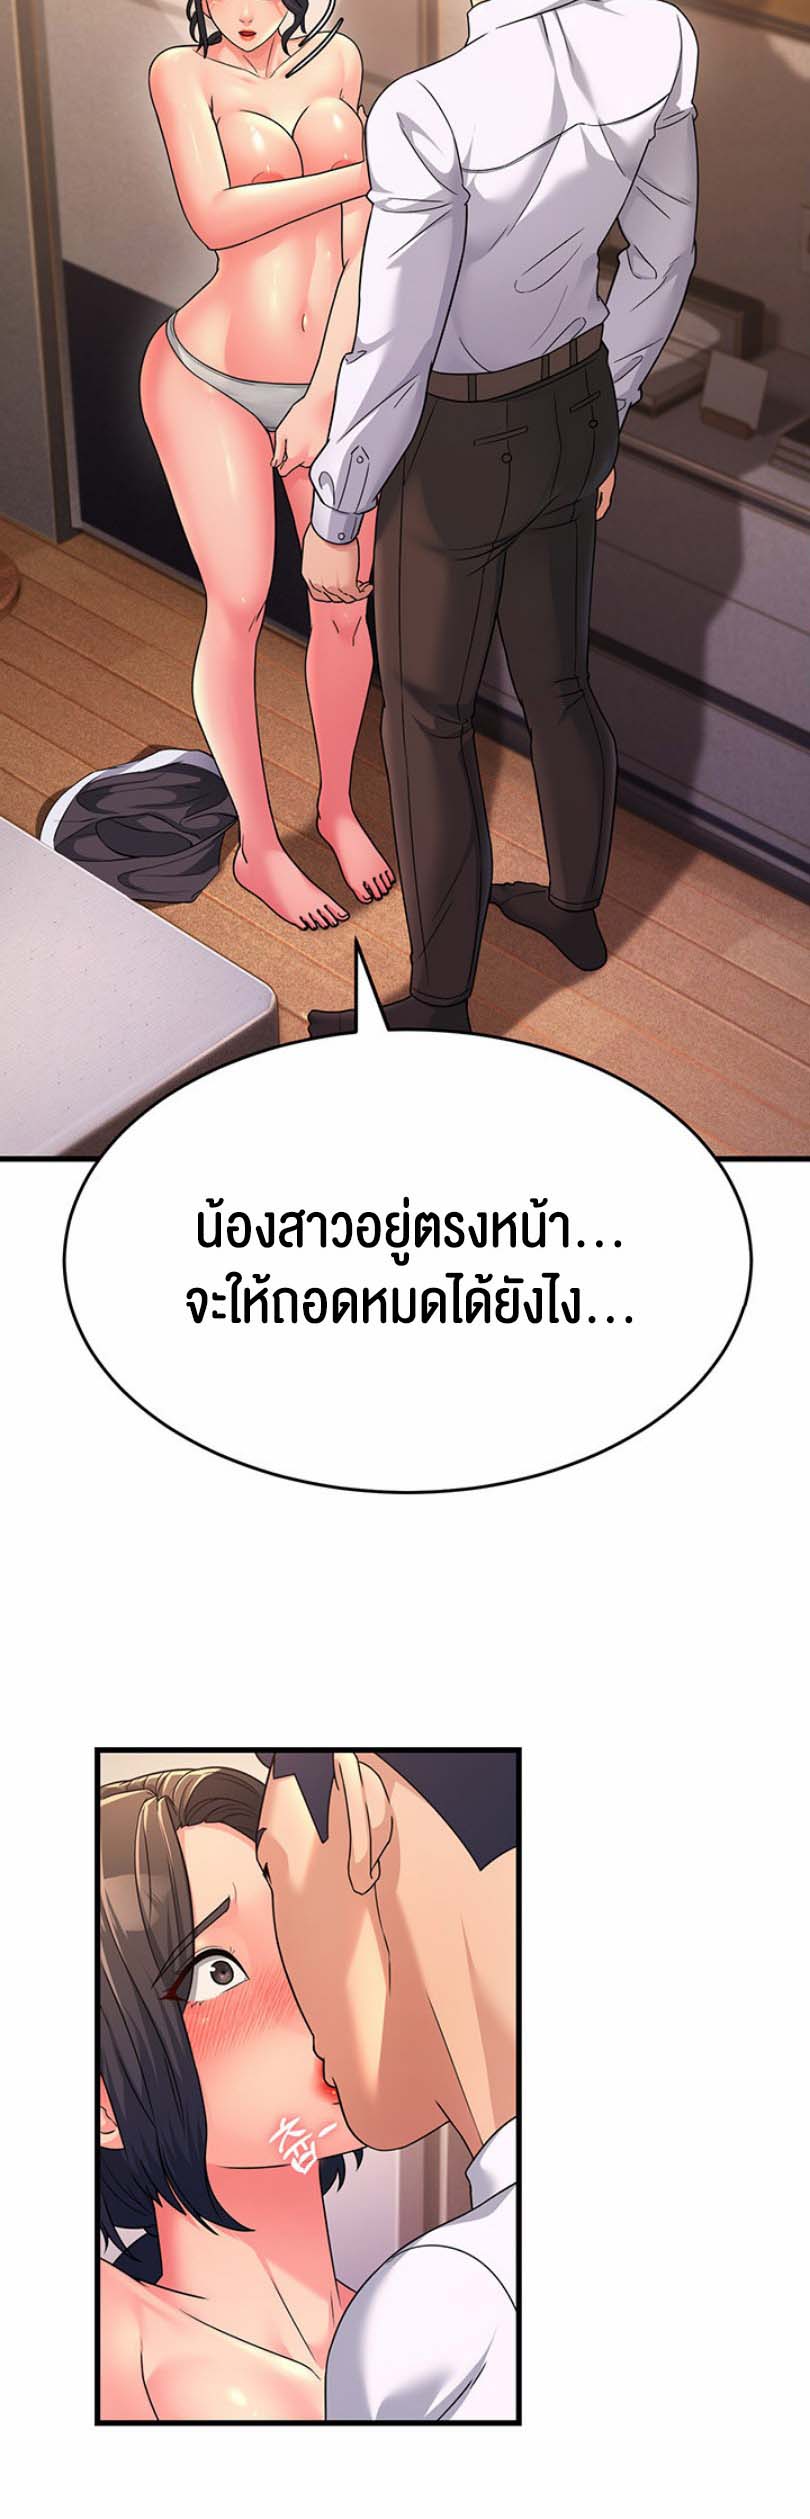 à¸­à¹ˆà¸²à¸™à¹‚à¸”à¸ˆà¸´à¸™ à¹€à¸£à¸·à¹ˆà¸­à¸‡ Mother in Law Bends To My Will 10 06